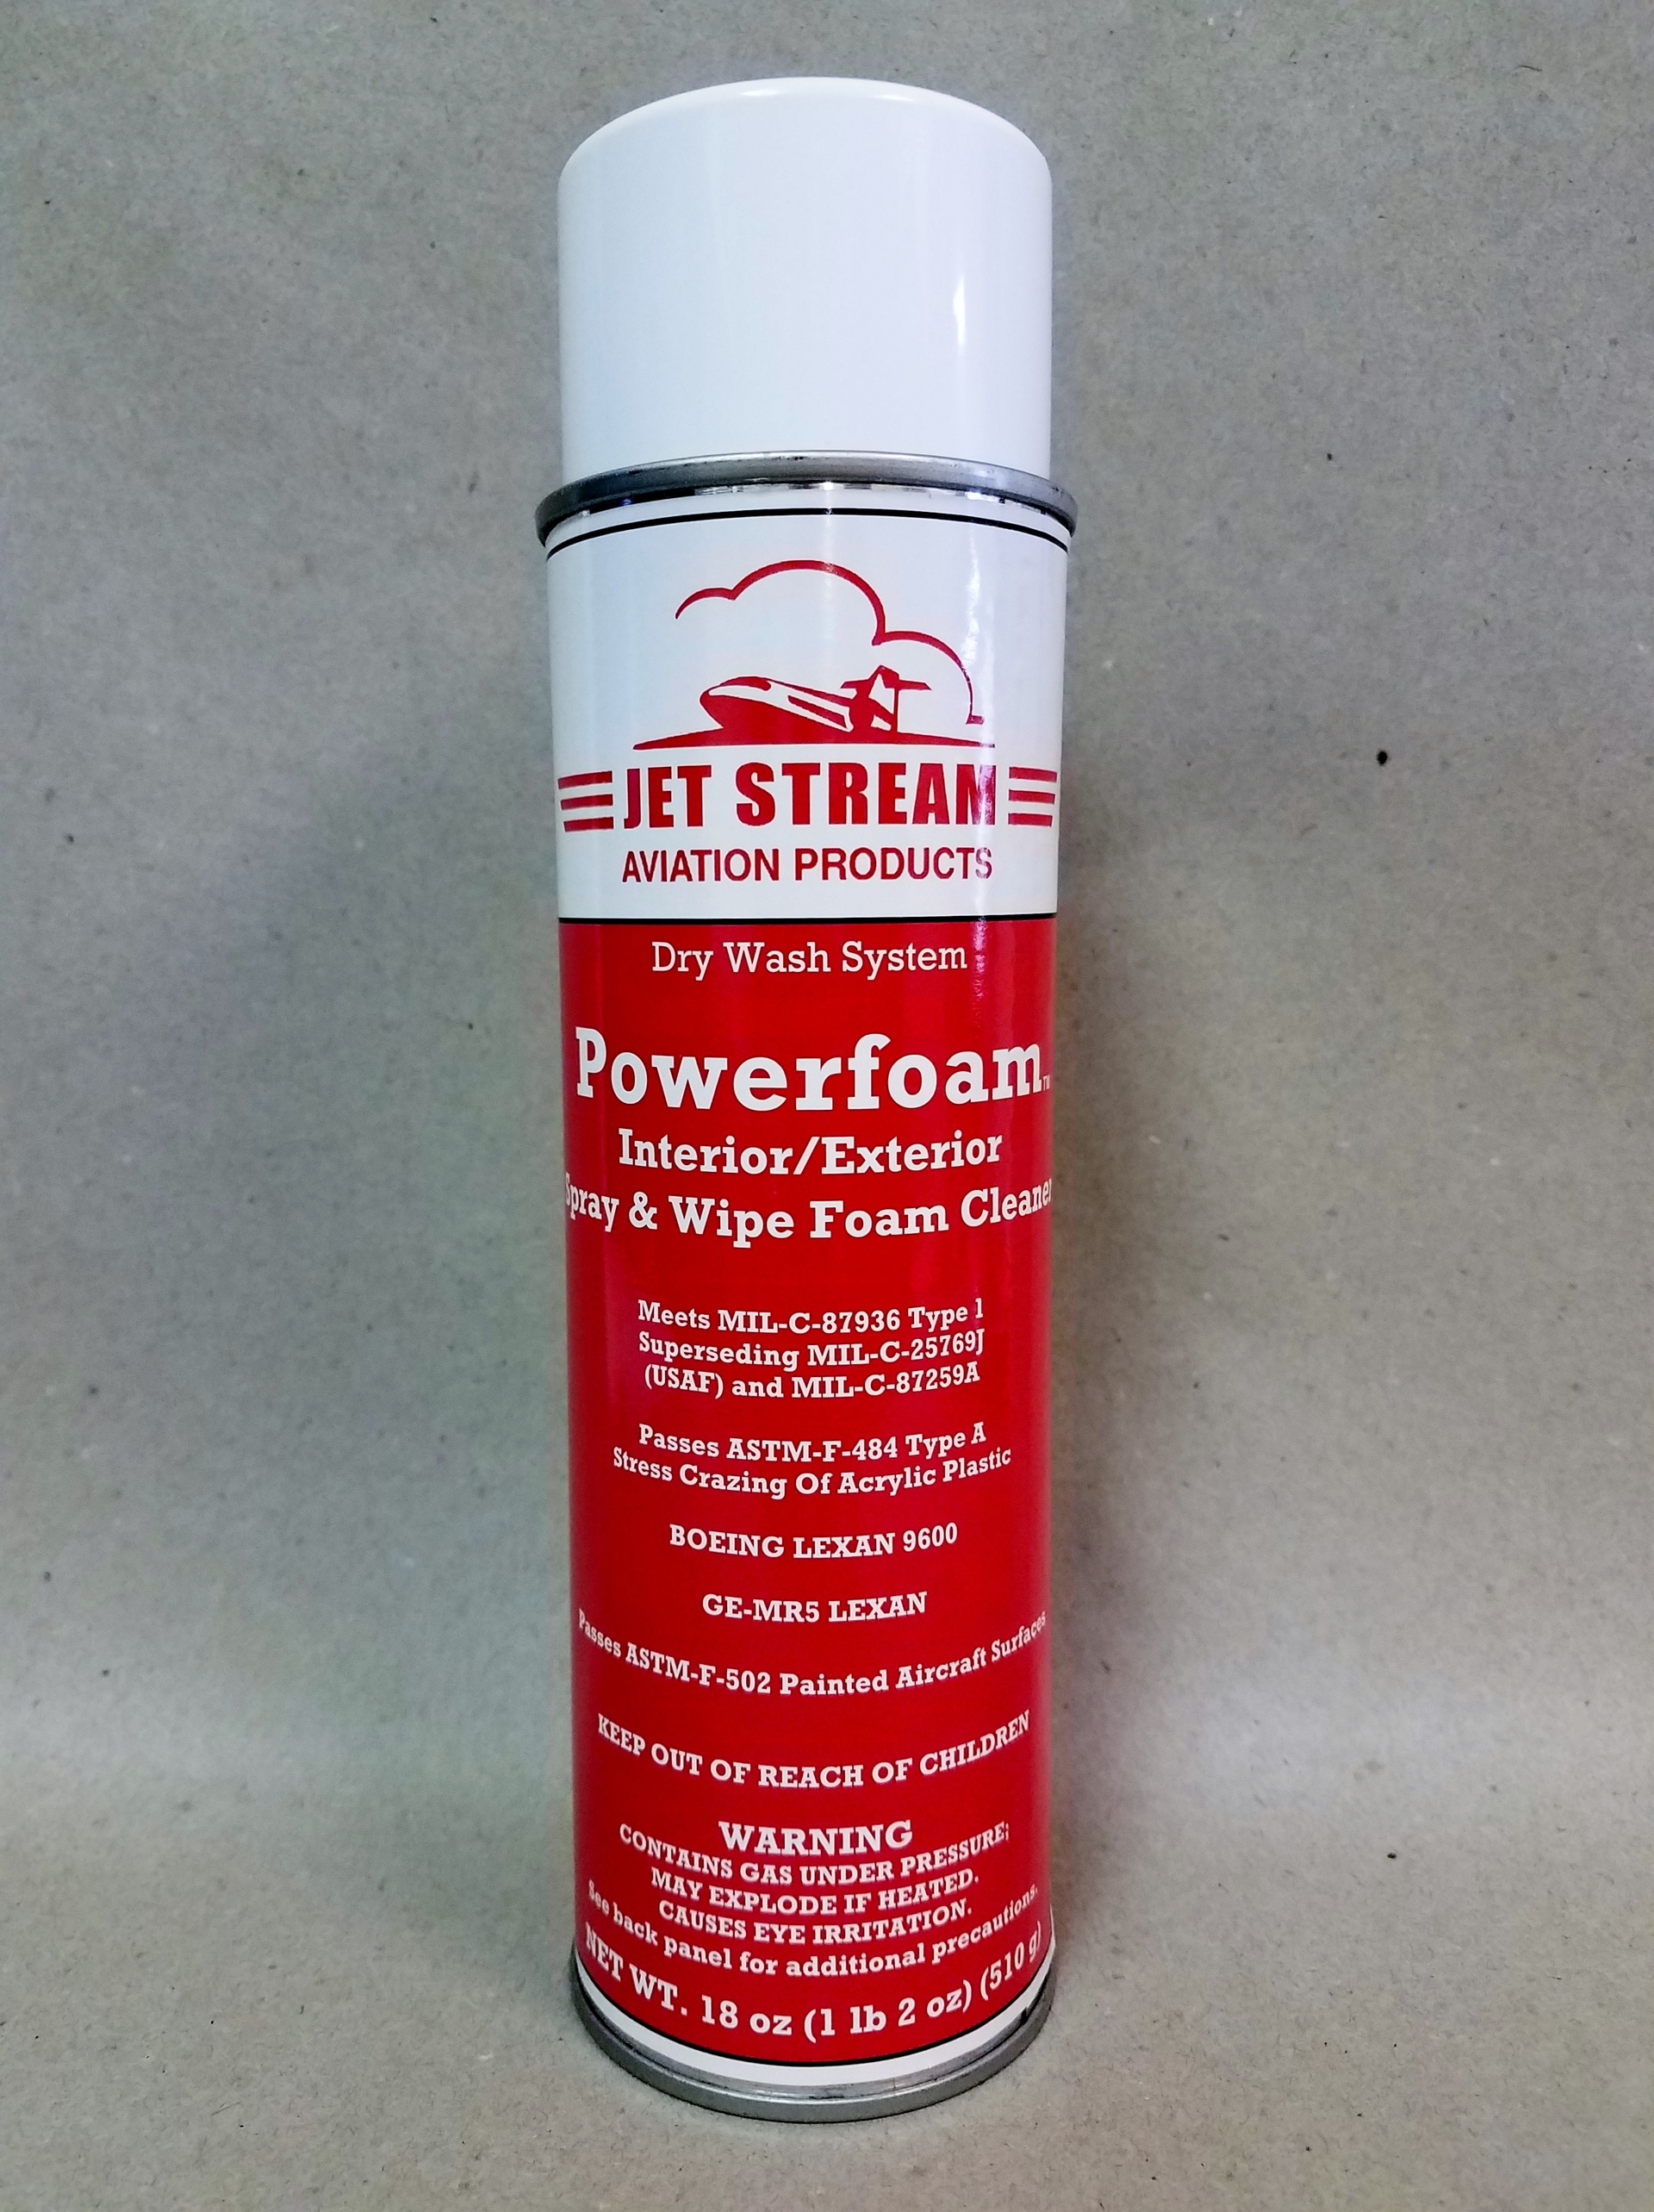 Jet Stream Aviation Products - Dry Wash System